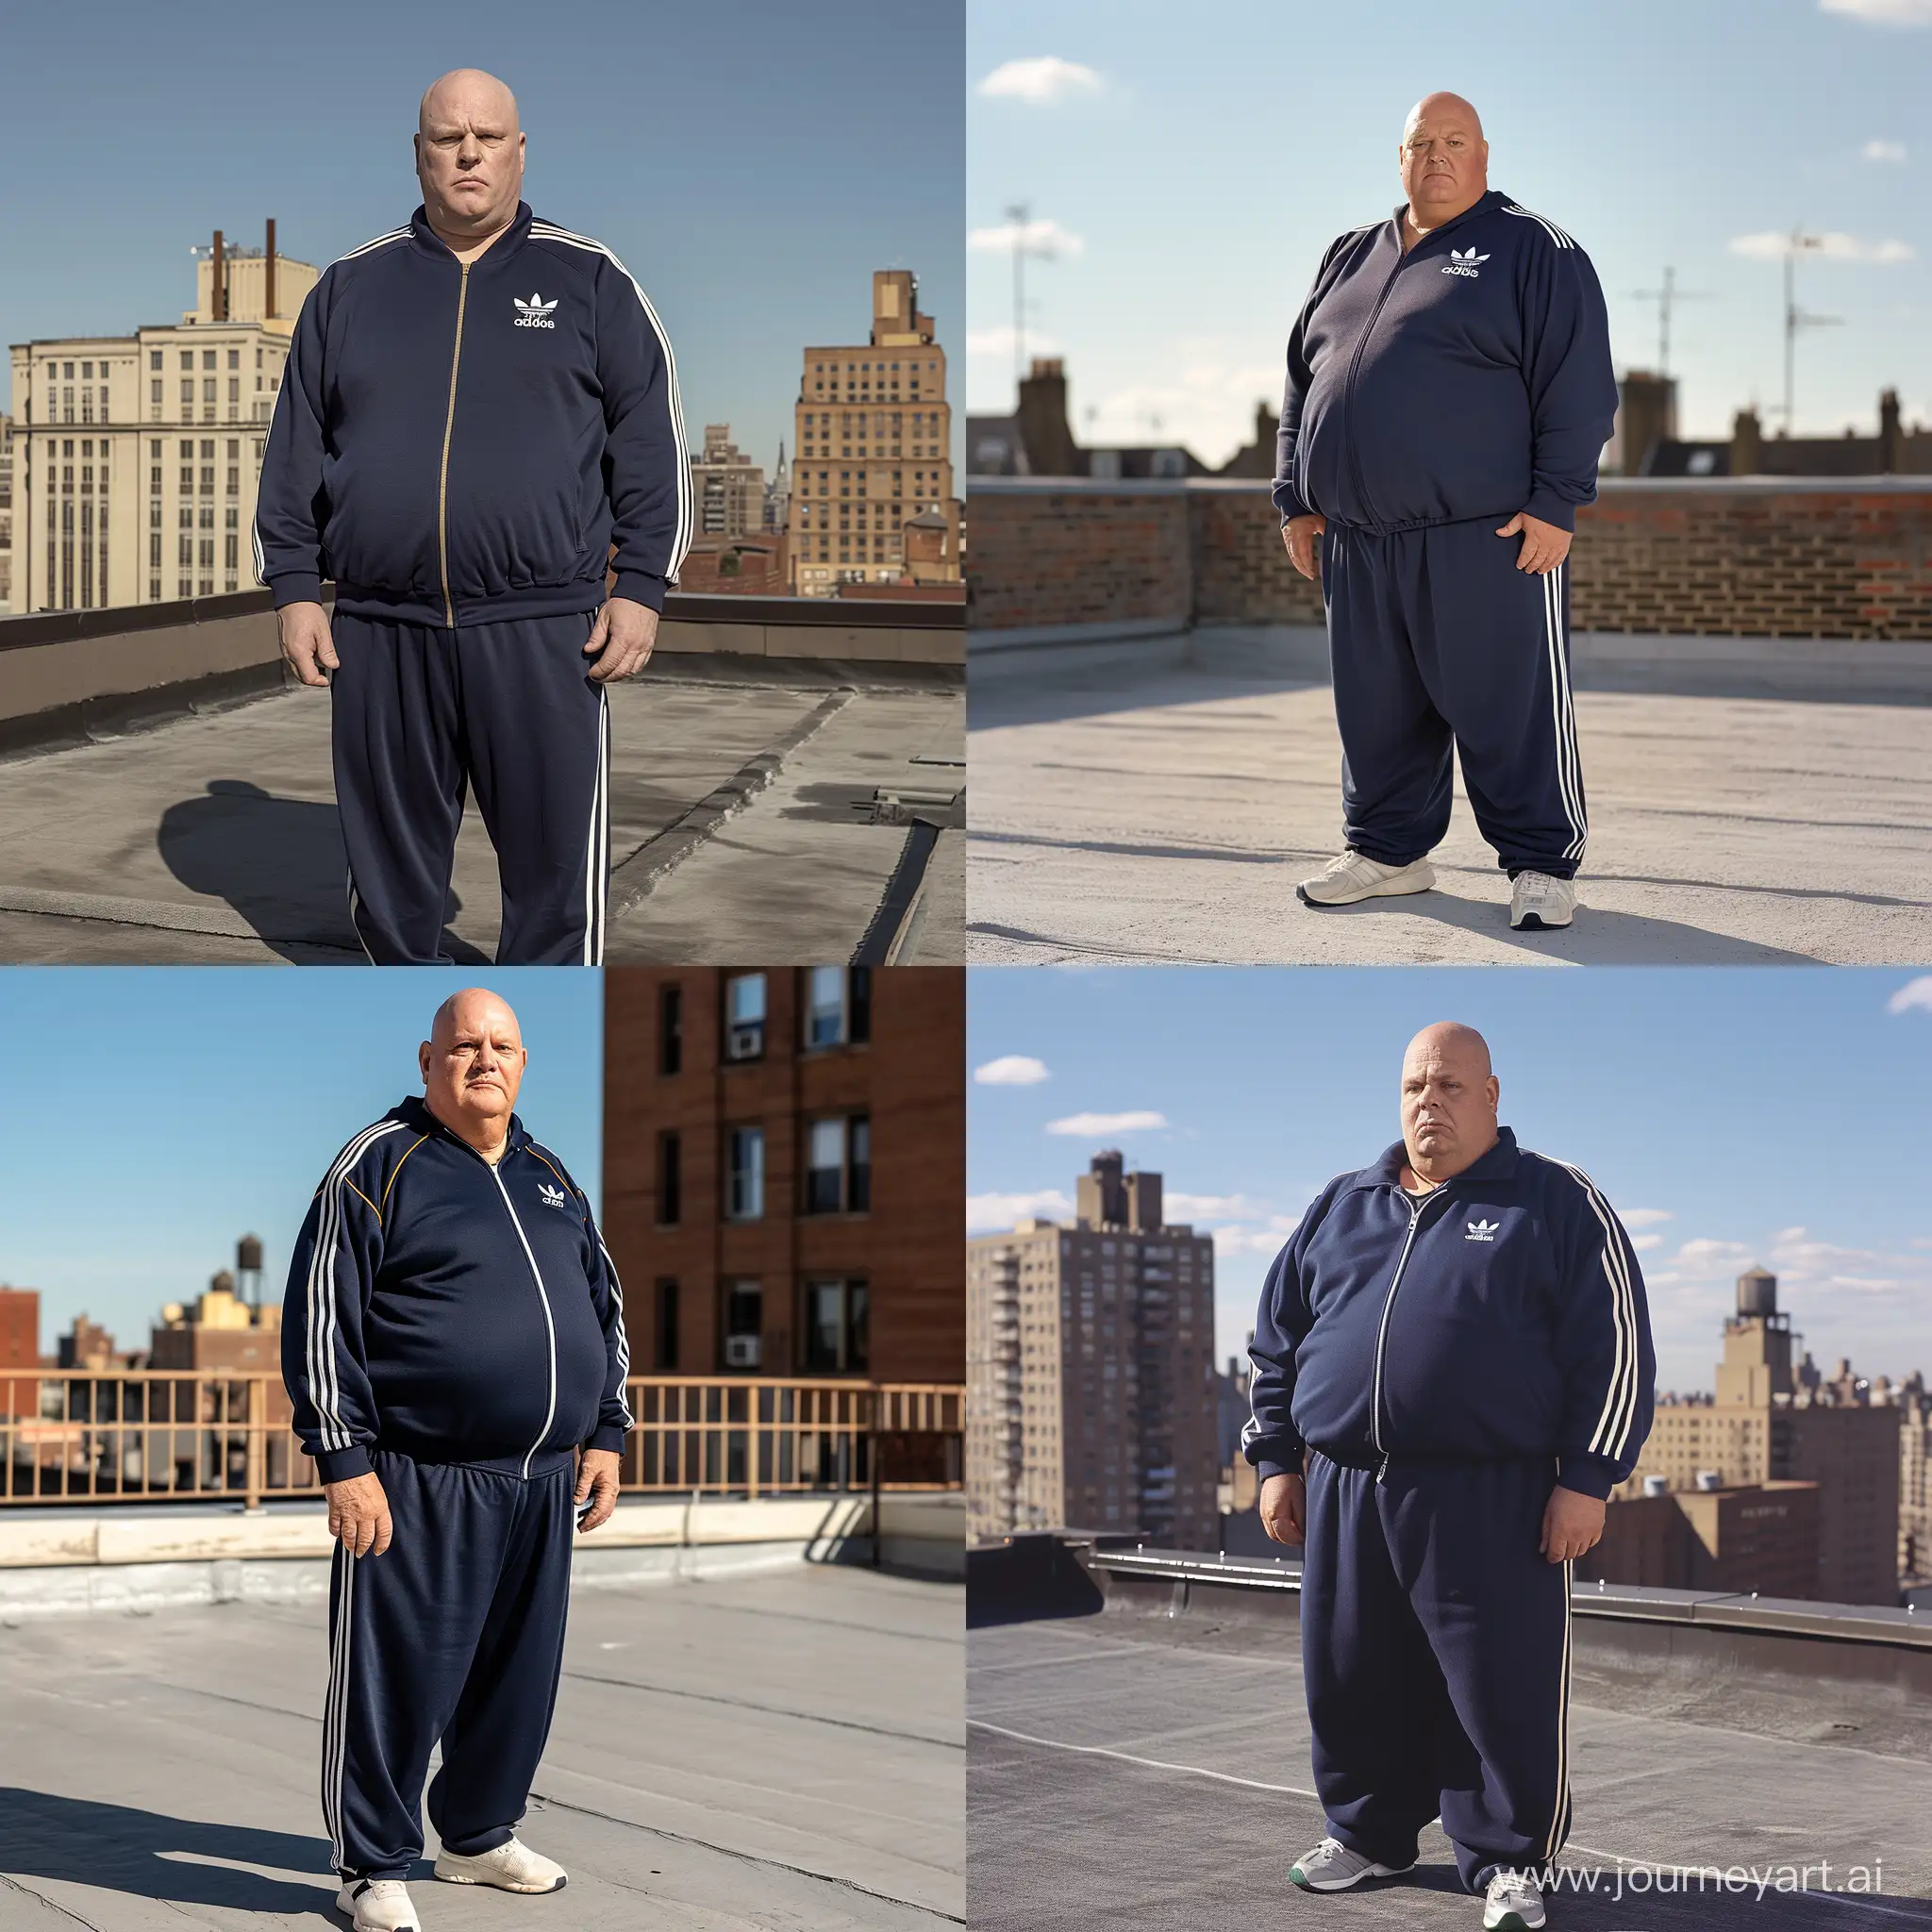 Elderly-Fitness-Enthusiast-in-Stylish-Navy-Adidas-Tracksuit-on-Rooftop